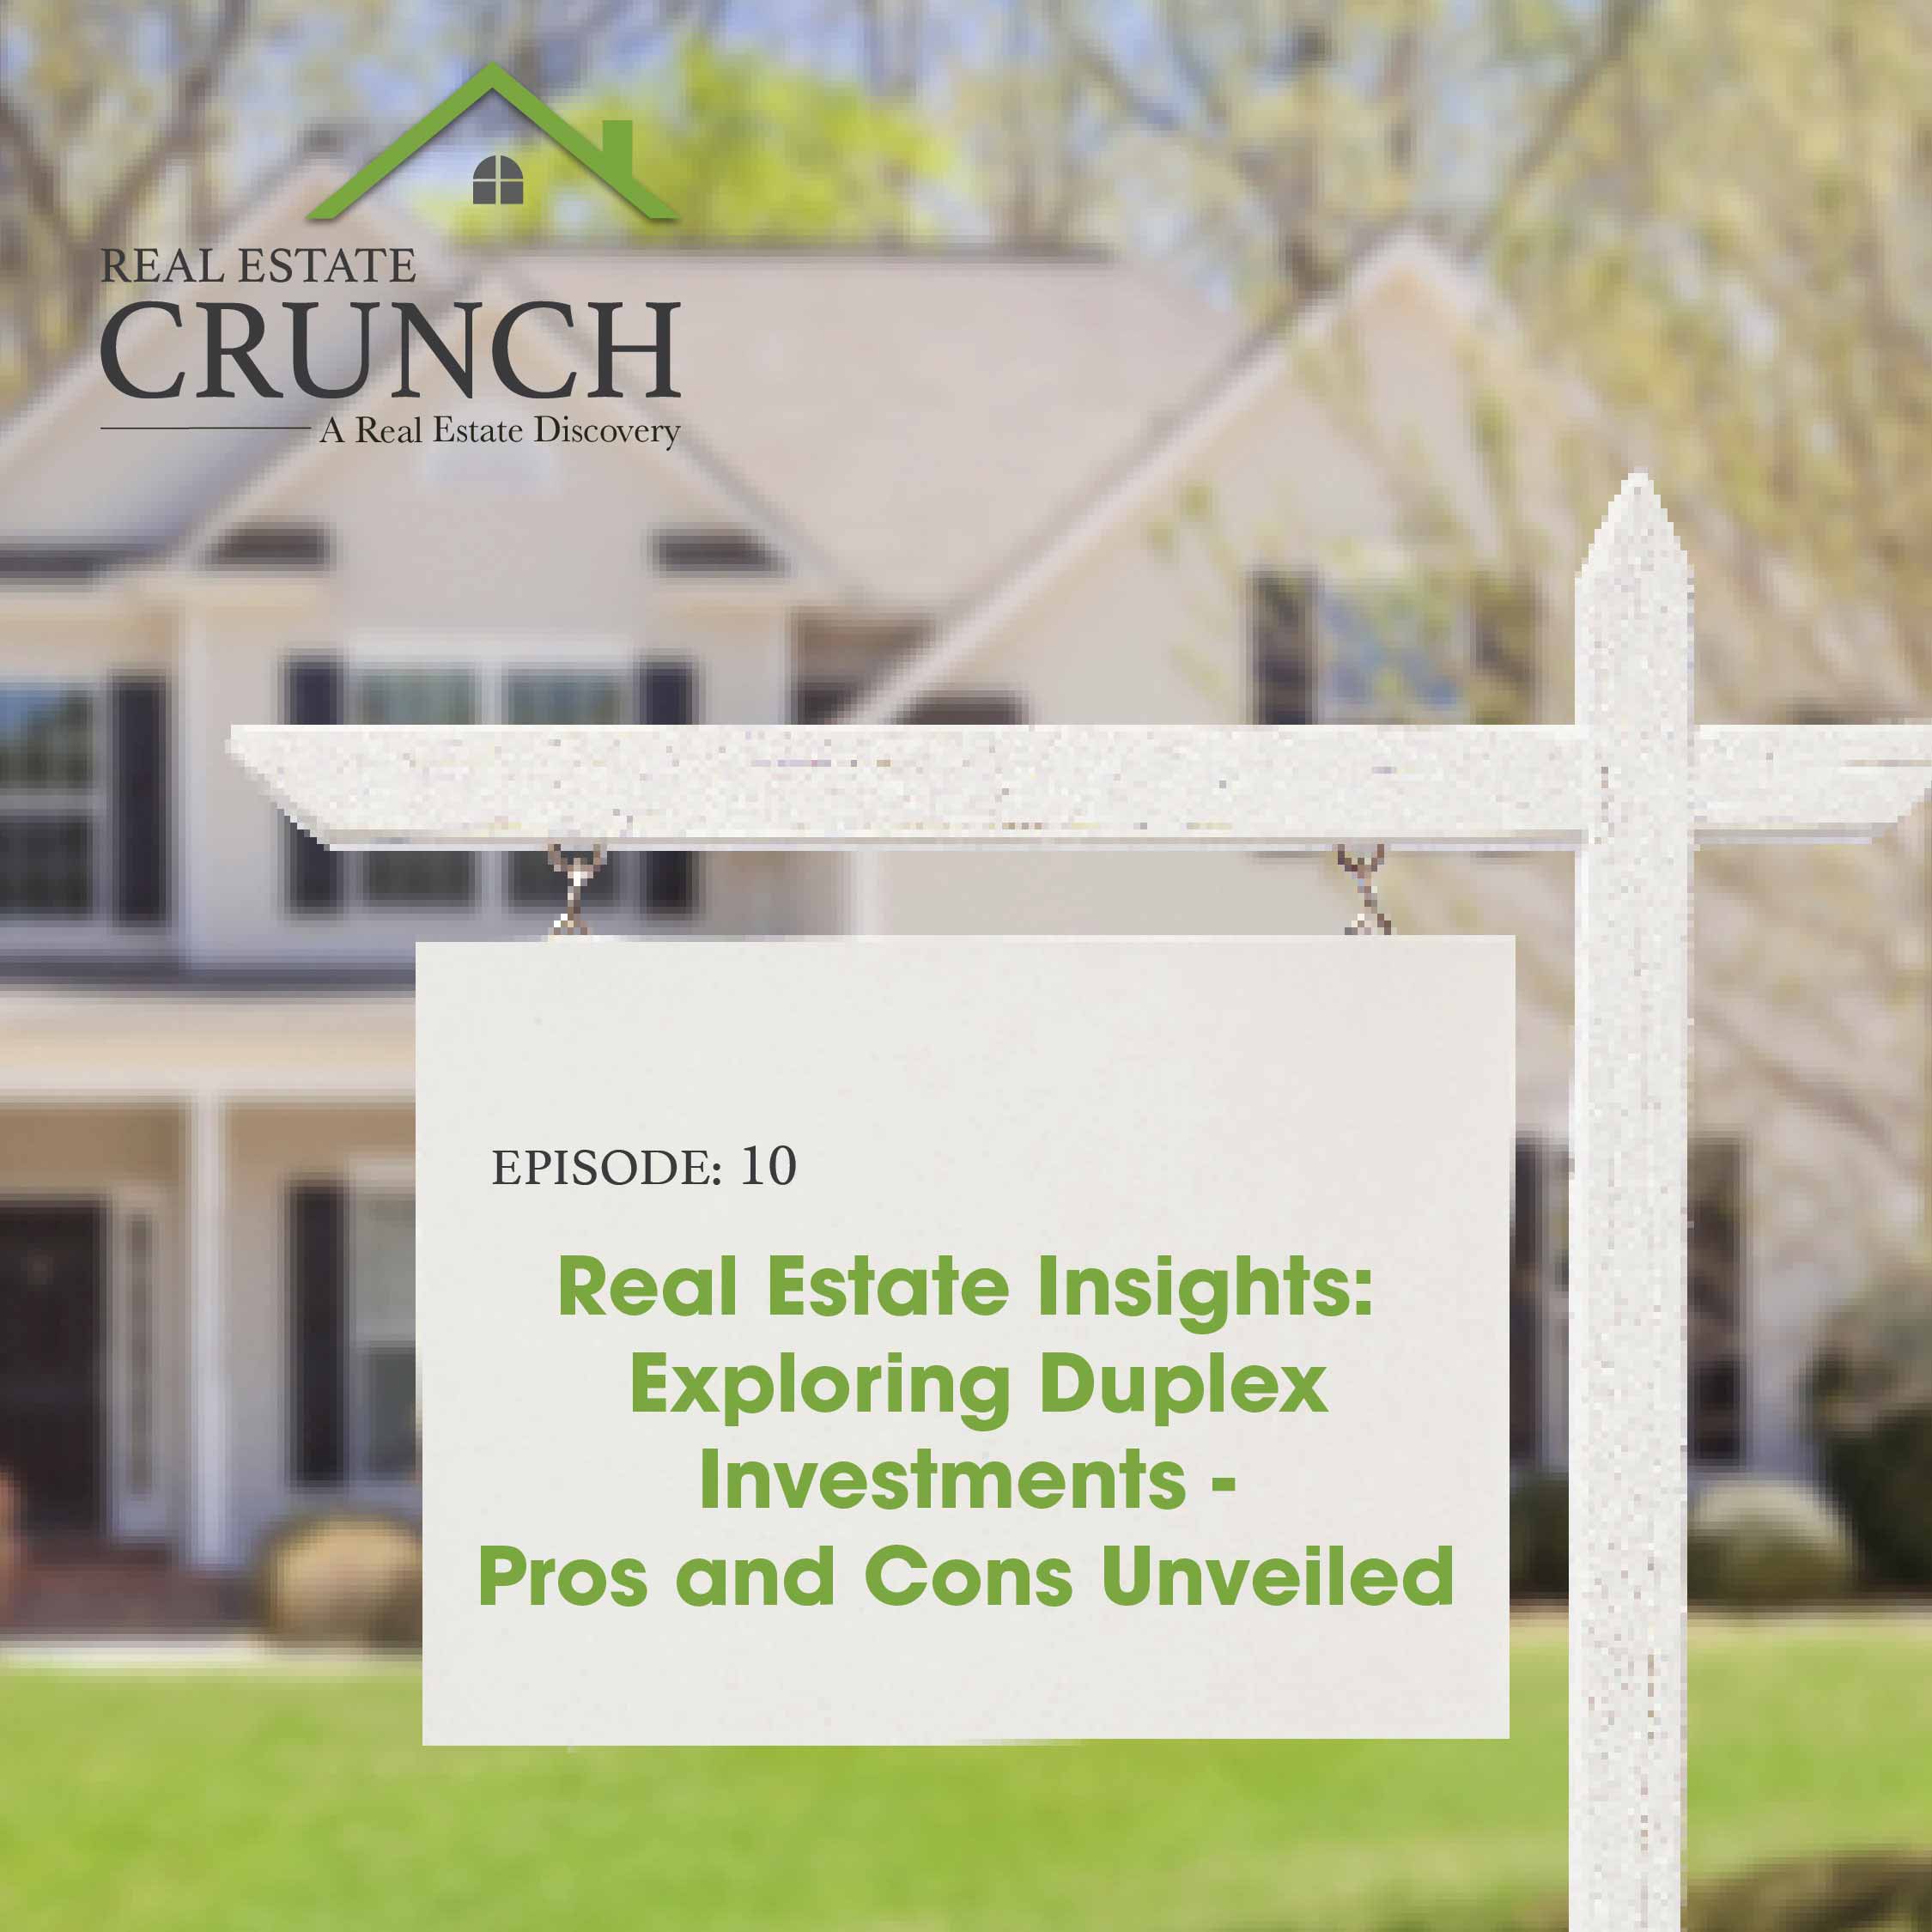 Real Estate Insights: Exploring Duplex Investments - Pros and Cons Unveiled